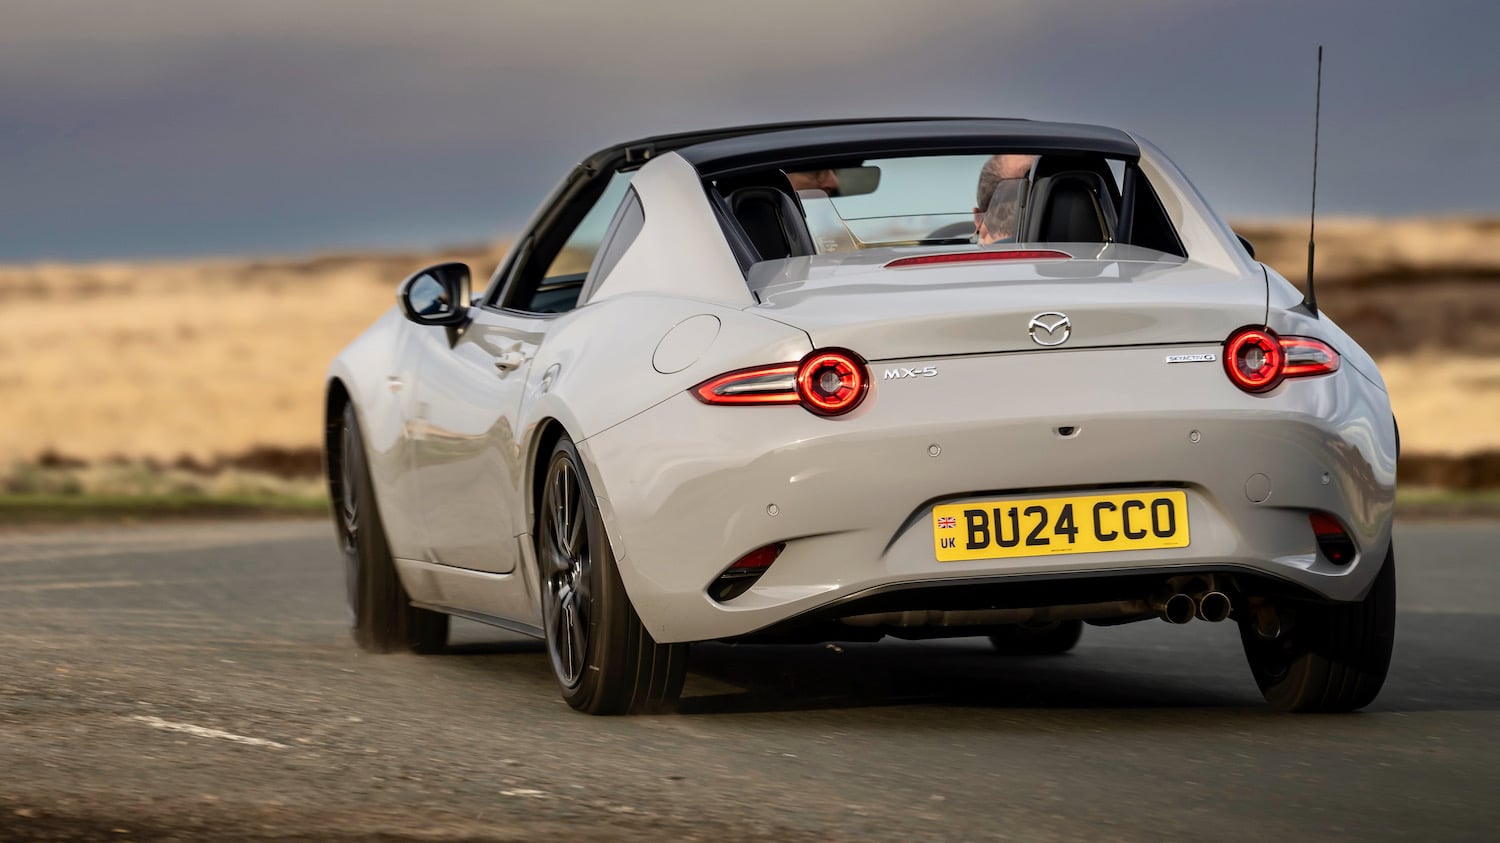 MAZDA MX-5 RF Exclusive-Line, better than ever